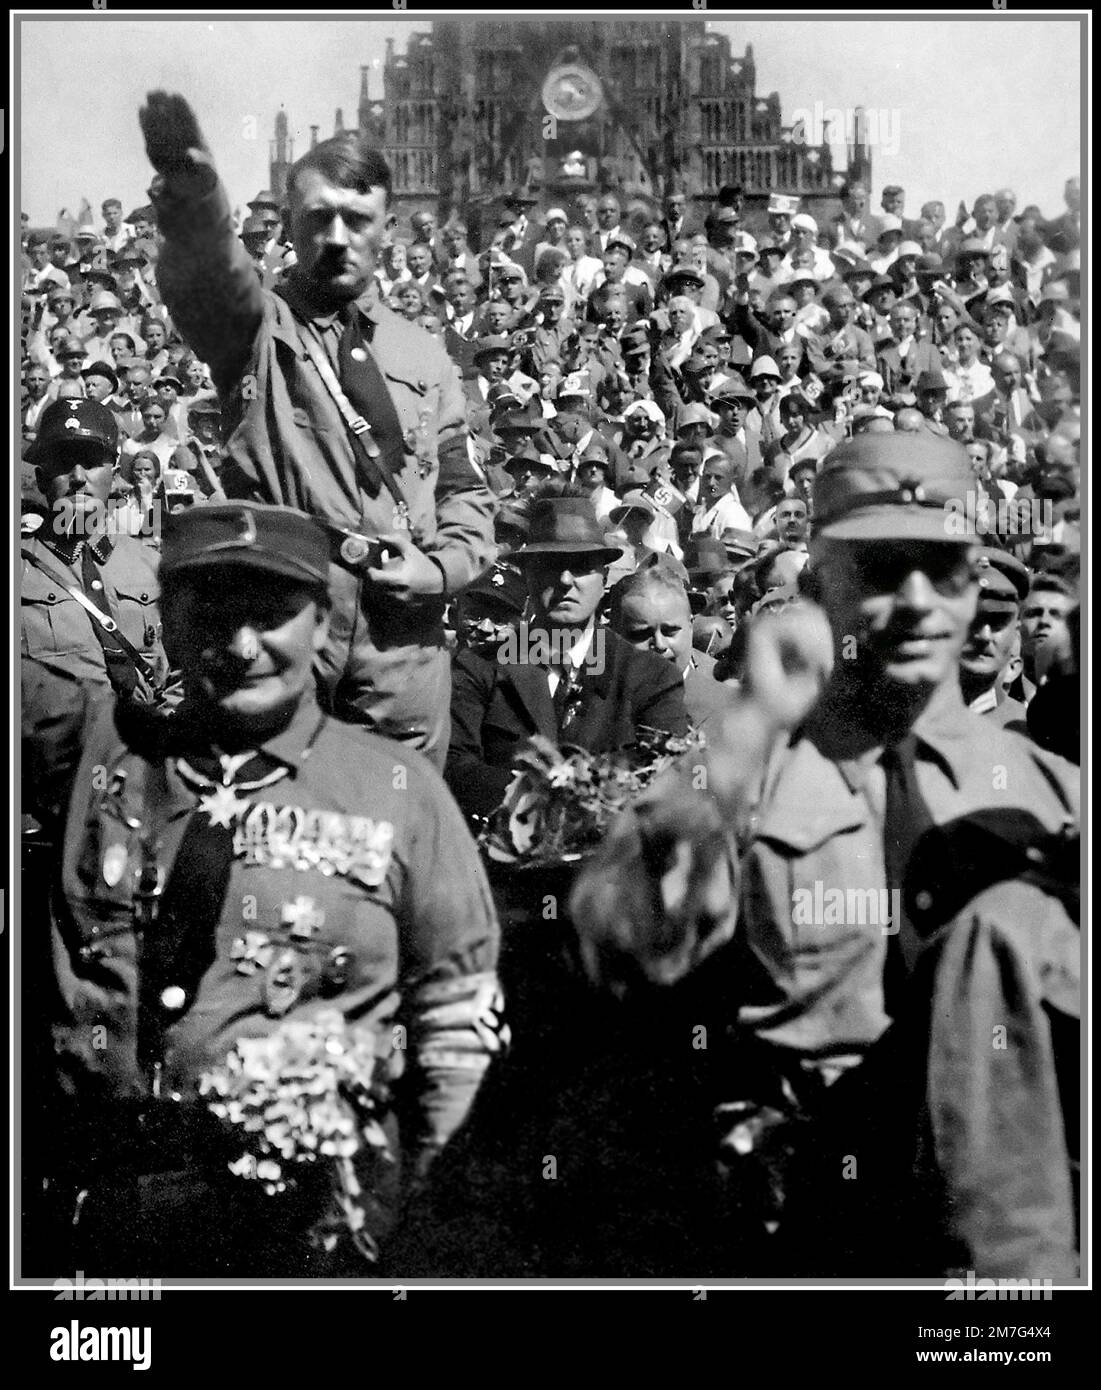 Adolf Hitler 1930s at a Nuremberg Nazi Germany rally with Hermann Goring in foreground. A stern Adolf Hitler in SA uniform giving a Heil Hitler salute Stock Photo